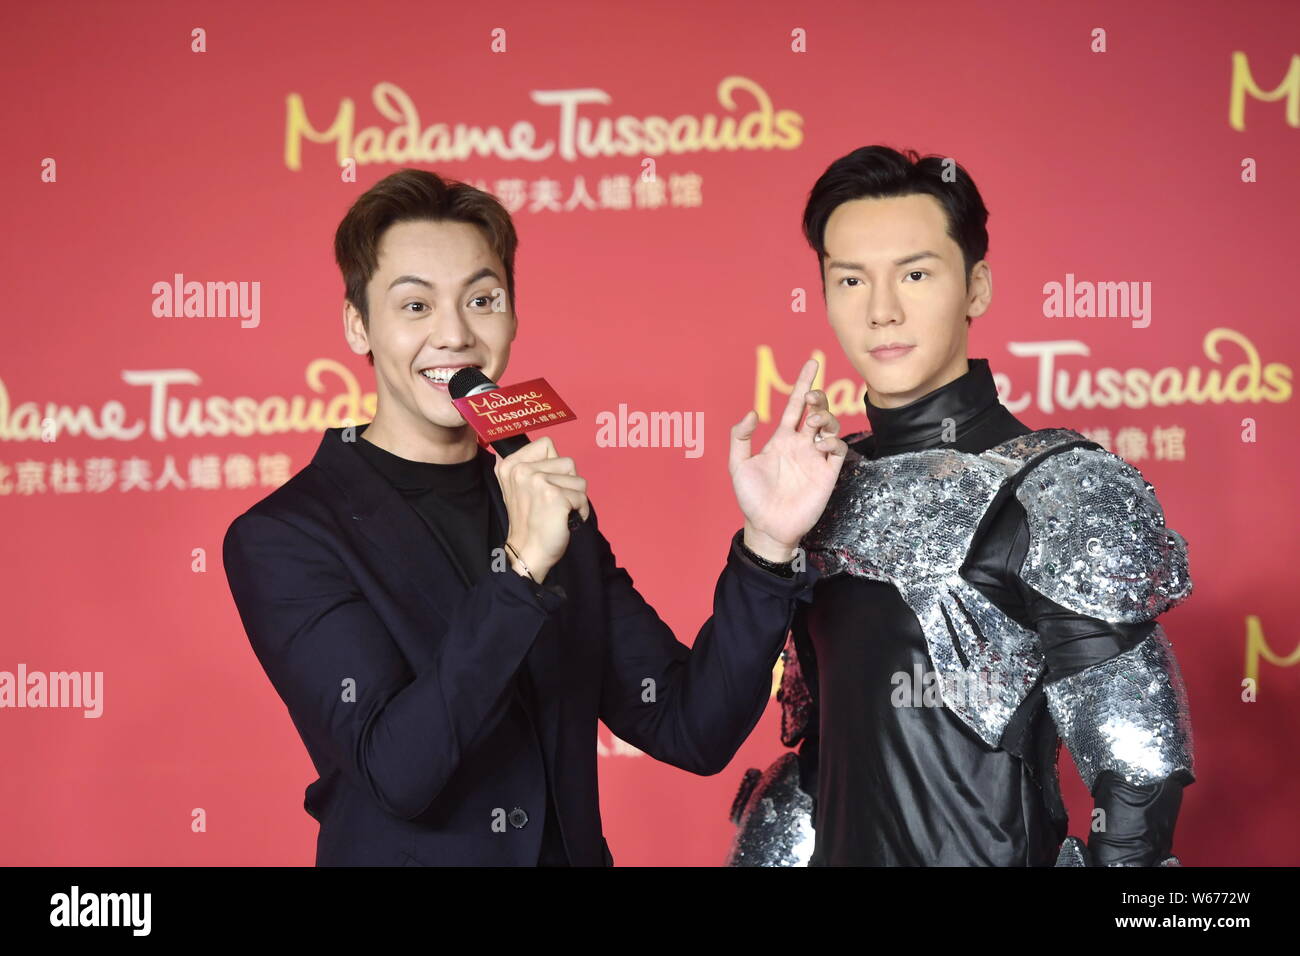 Stephen Curry Scores Wax Figure in Madame Tussauds San Francisco for 2016 |  Business Wire